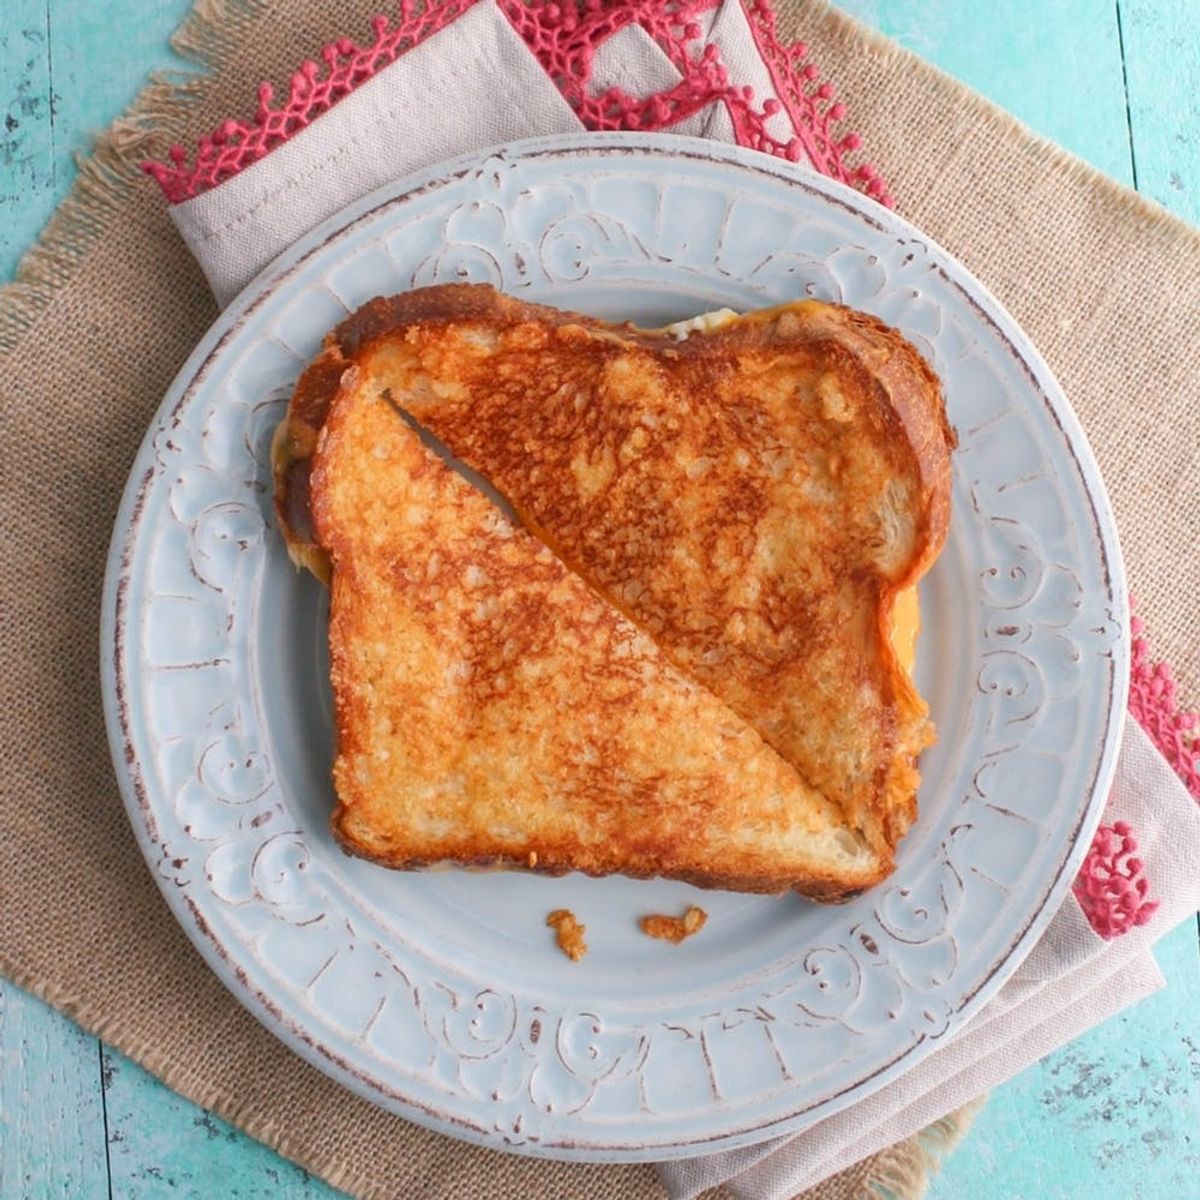 This Simple Hack Makes Your Grilled Cheese Even Better